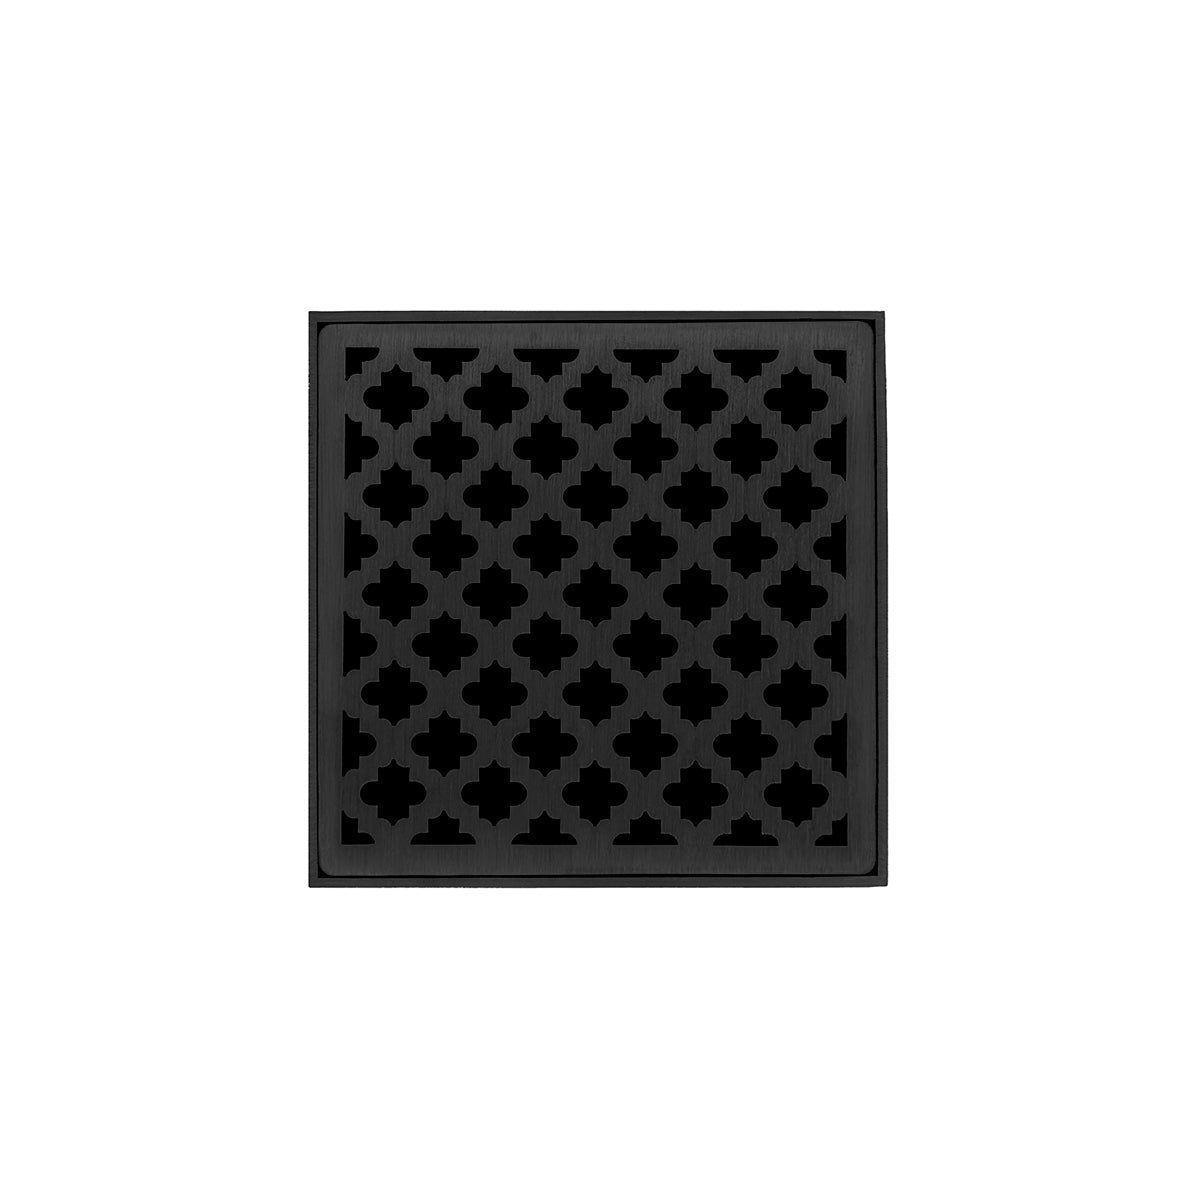 Infinity Drain 5" x 5" MD 5 Premium Center Drain Kit with Moor Pattern Decorative Plate with ABS Drain Body, 2" Outlet